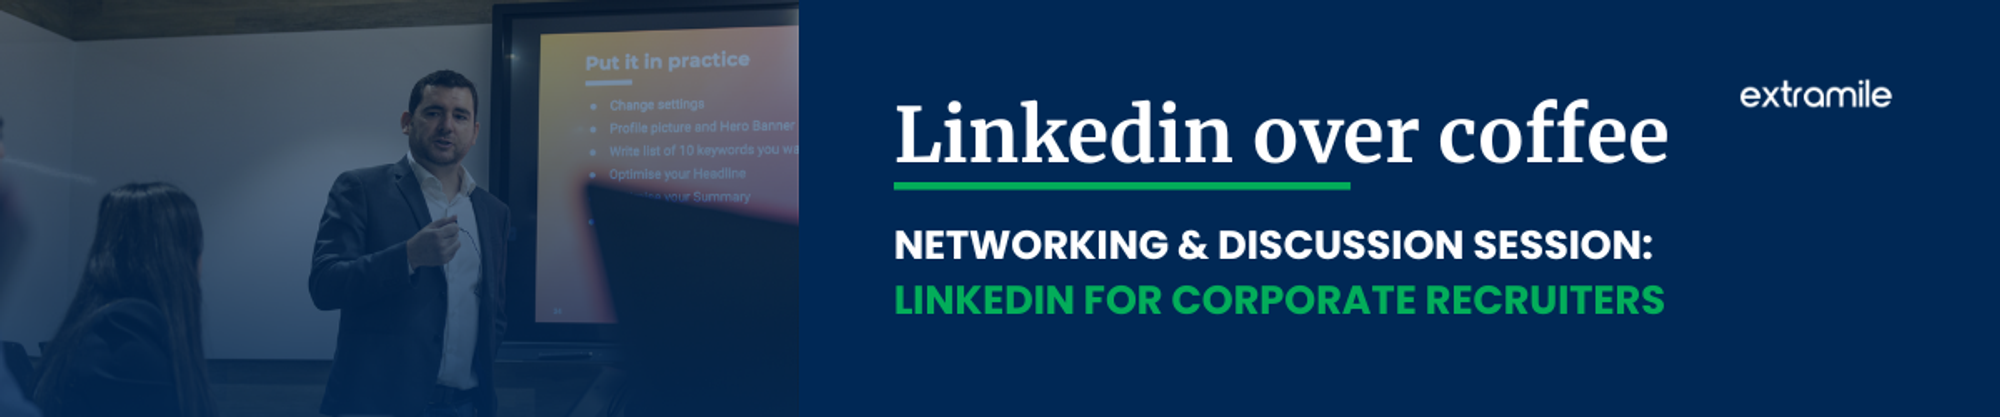 Linkedin over coffee | Networking & Linkedin for Corporate Recruiters